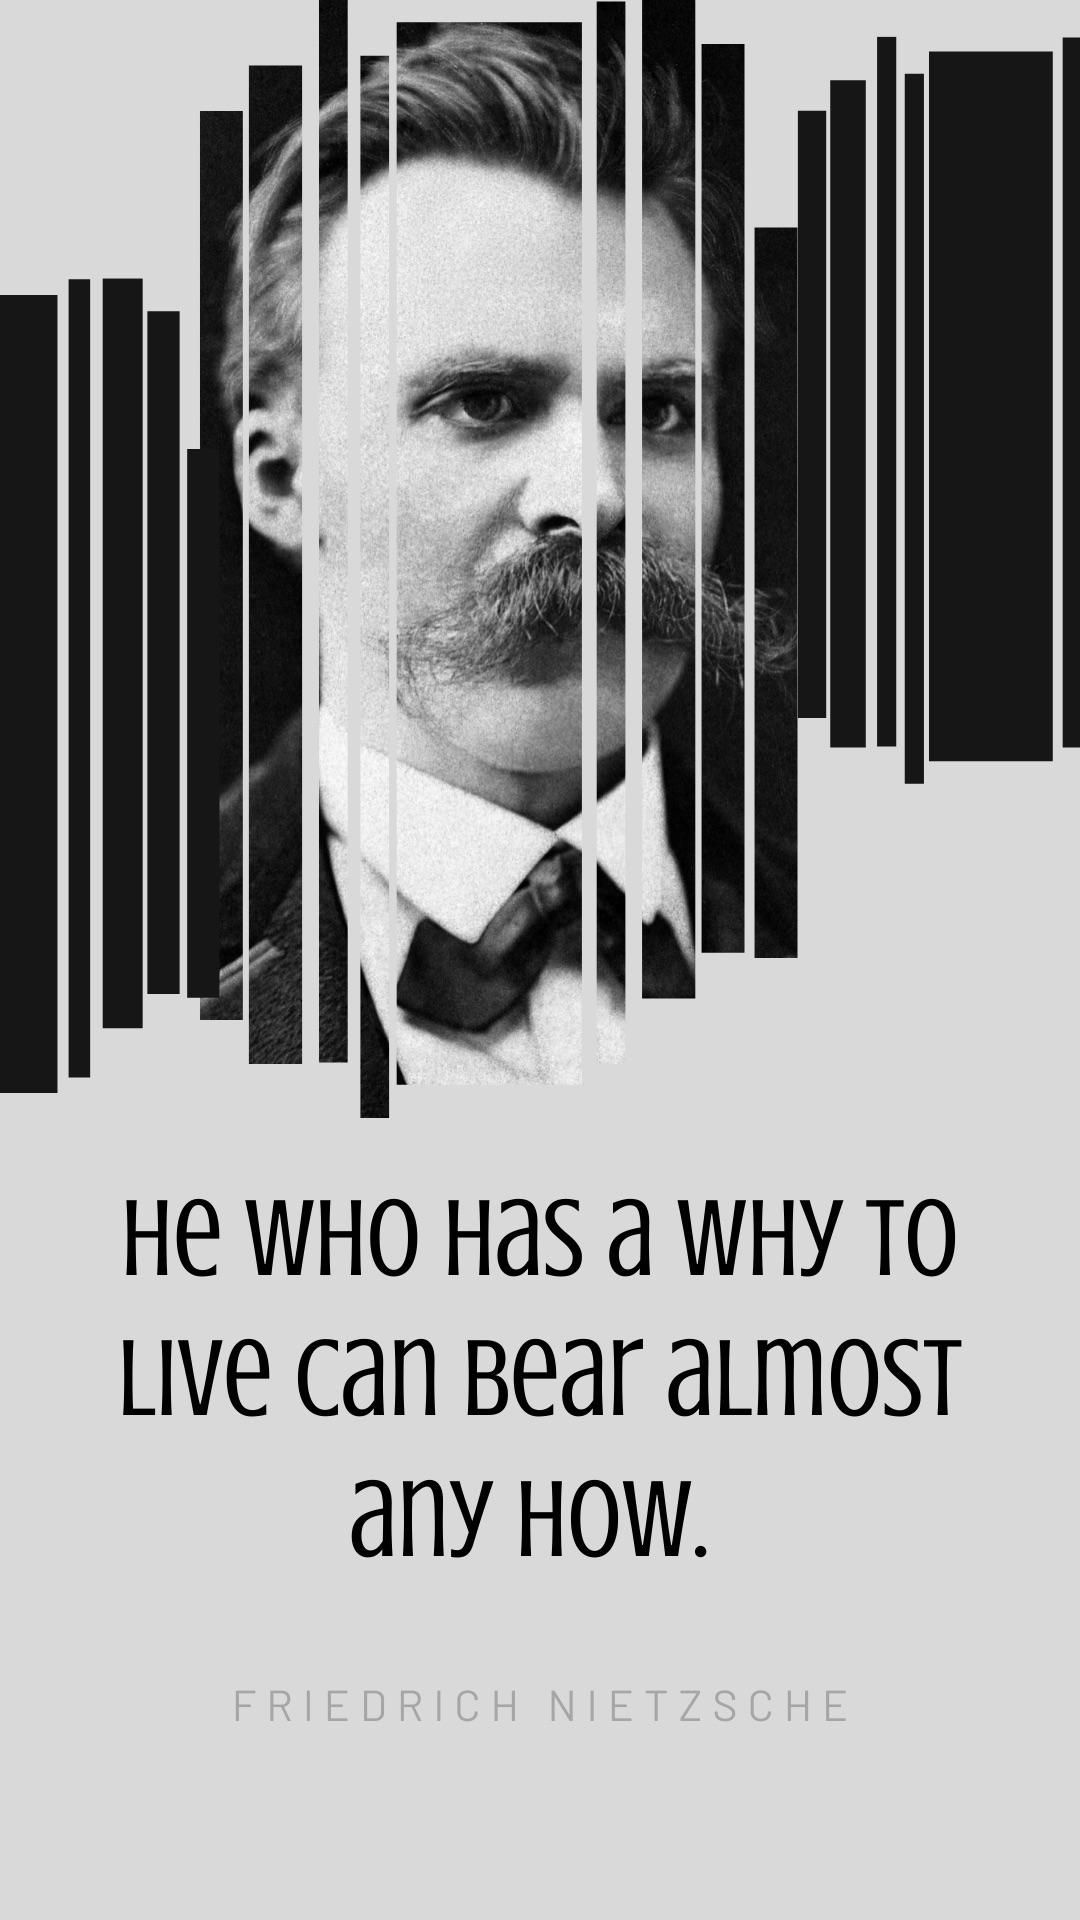 Having a why to live, Friedrich Nietzsche quotes, Nietzsche's insight, Bear almost any how, 1080x1920 Full HD Phone